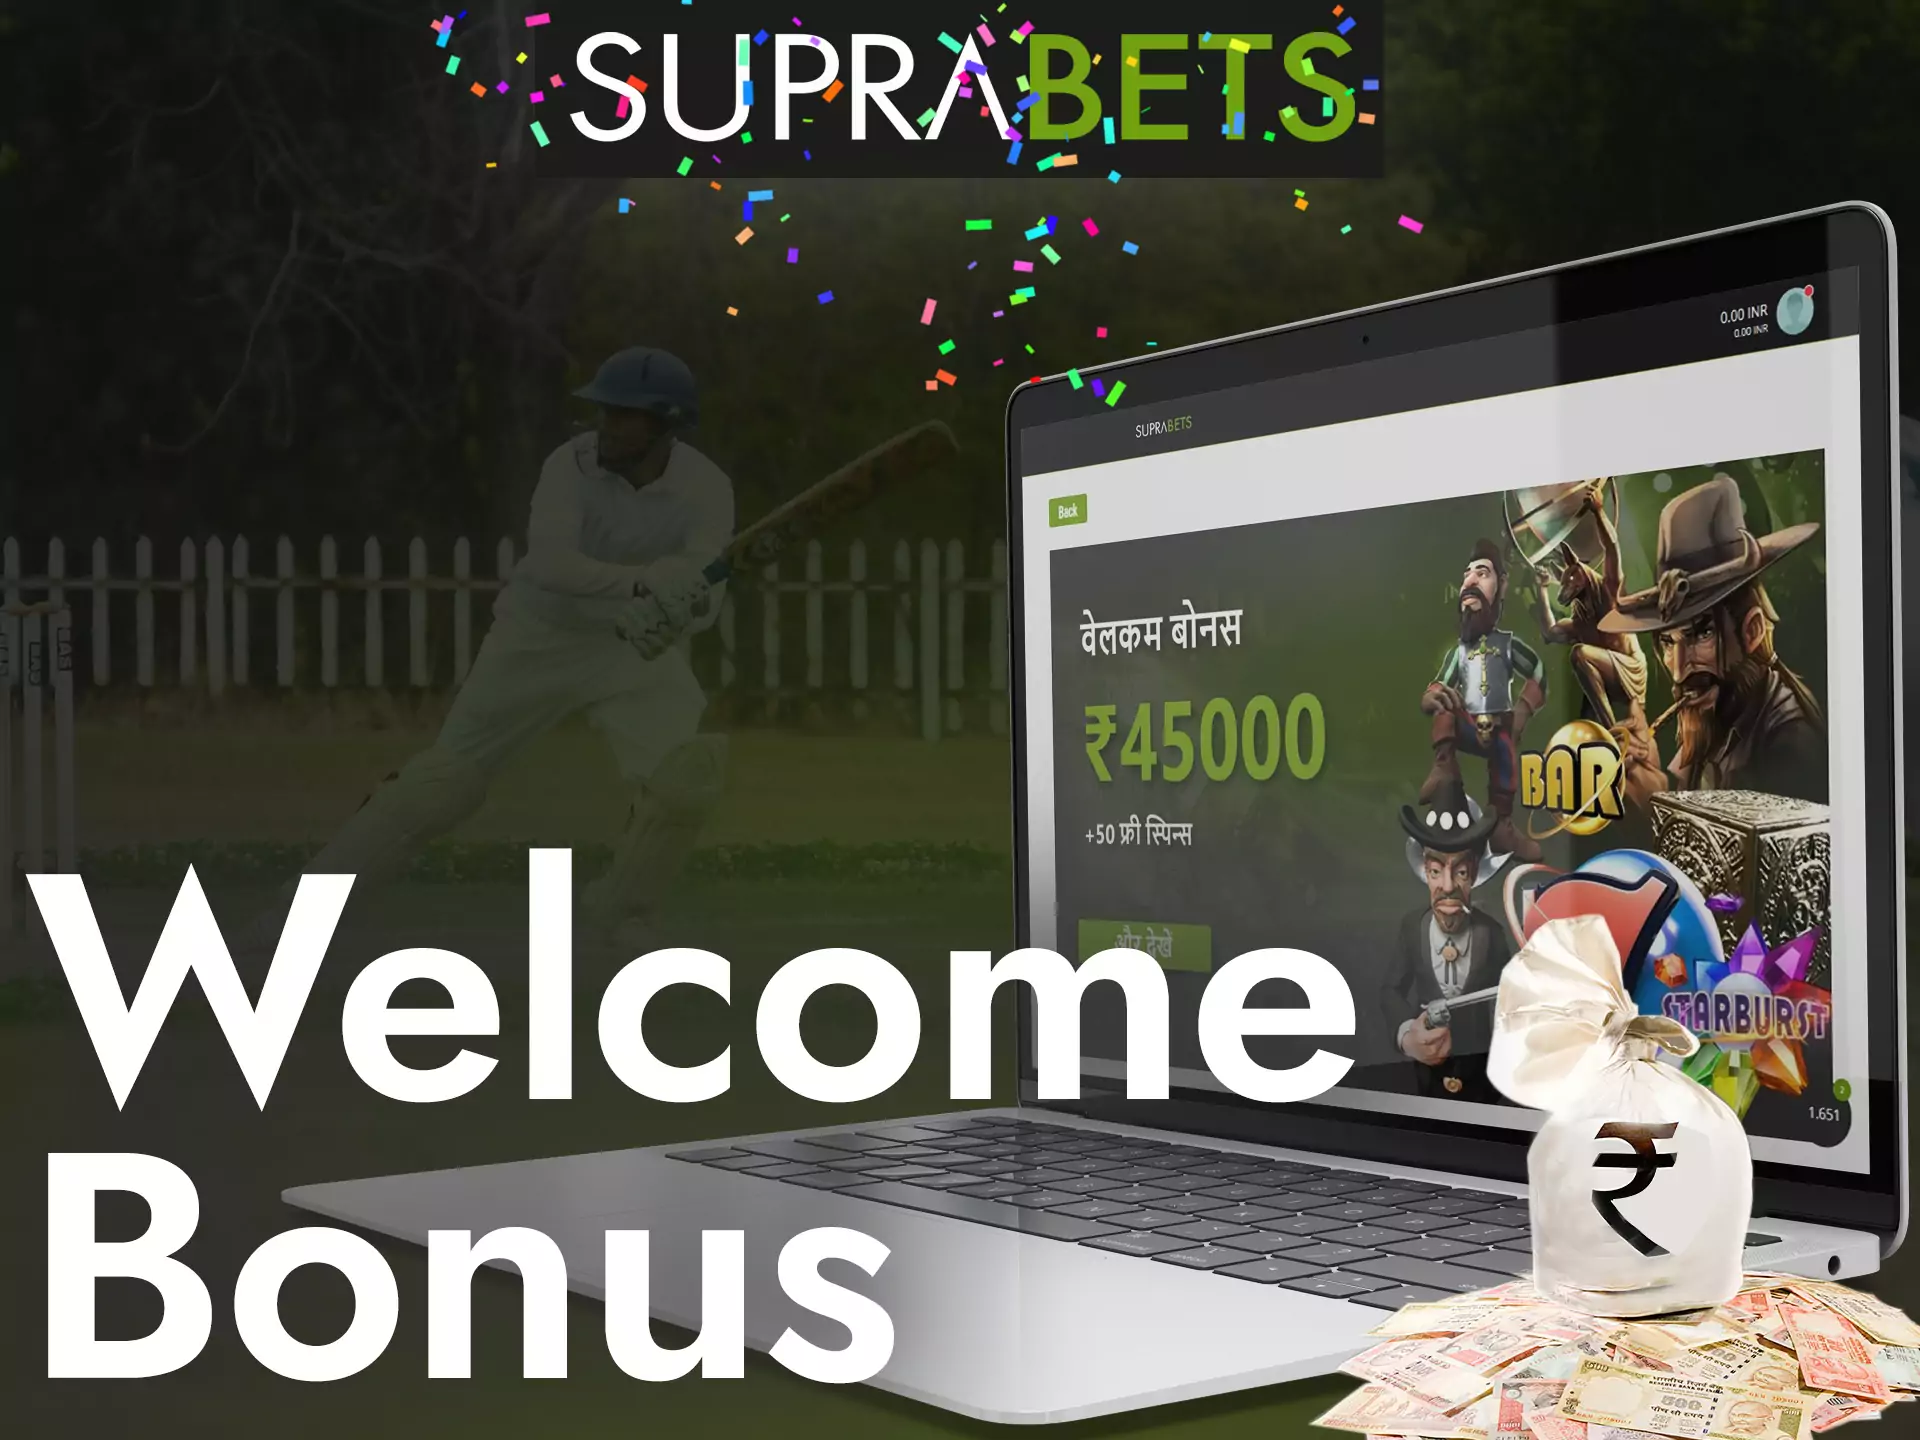 Get a welcome bonus from Suprabets immediately after registration.